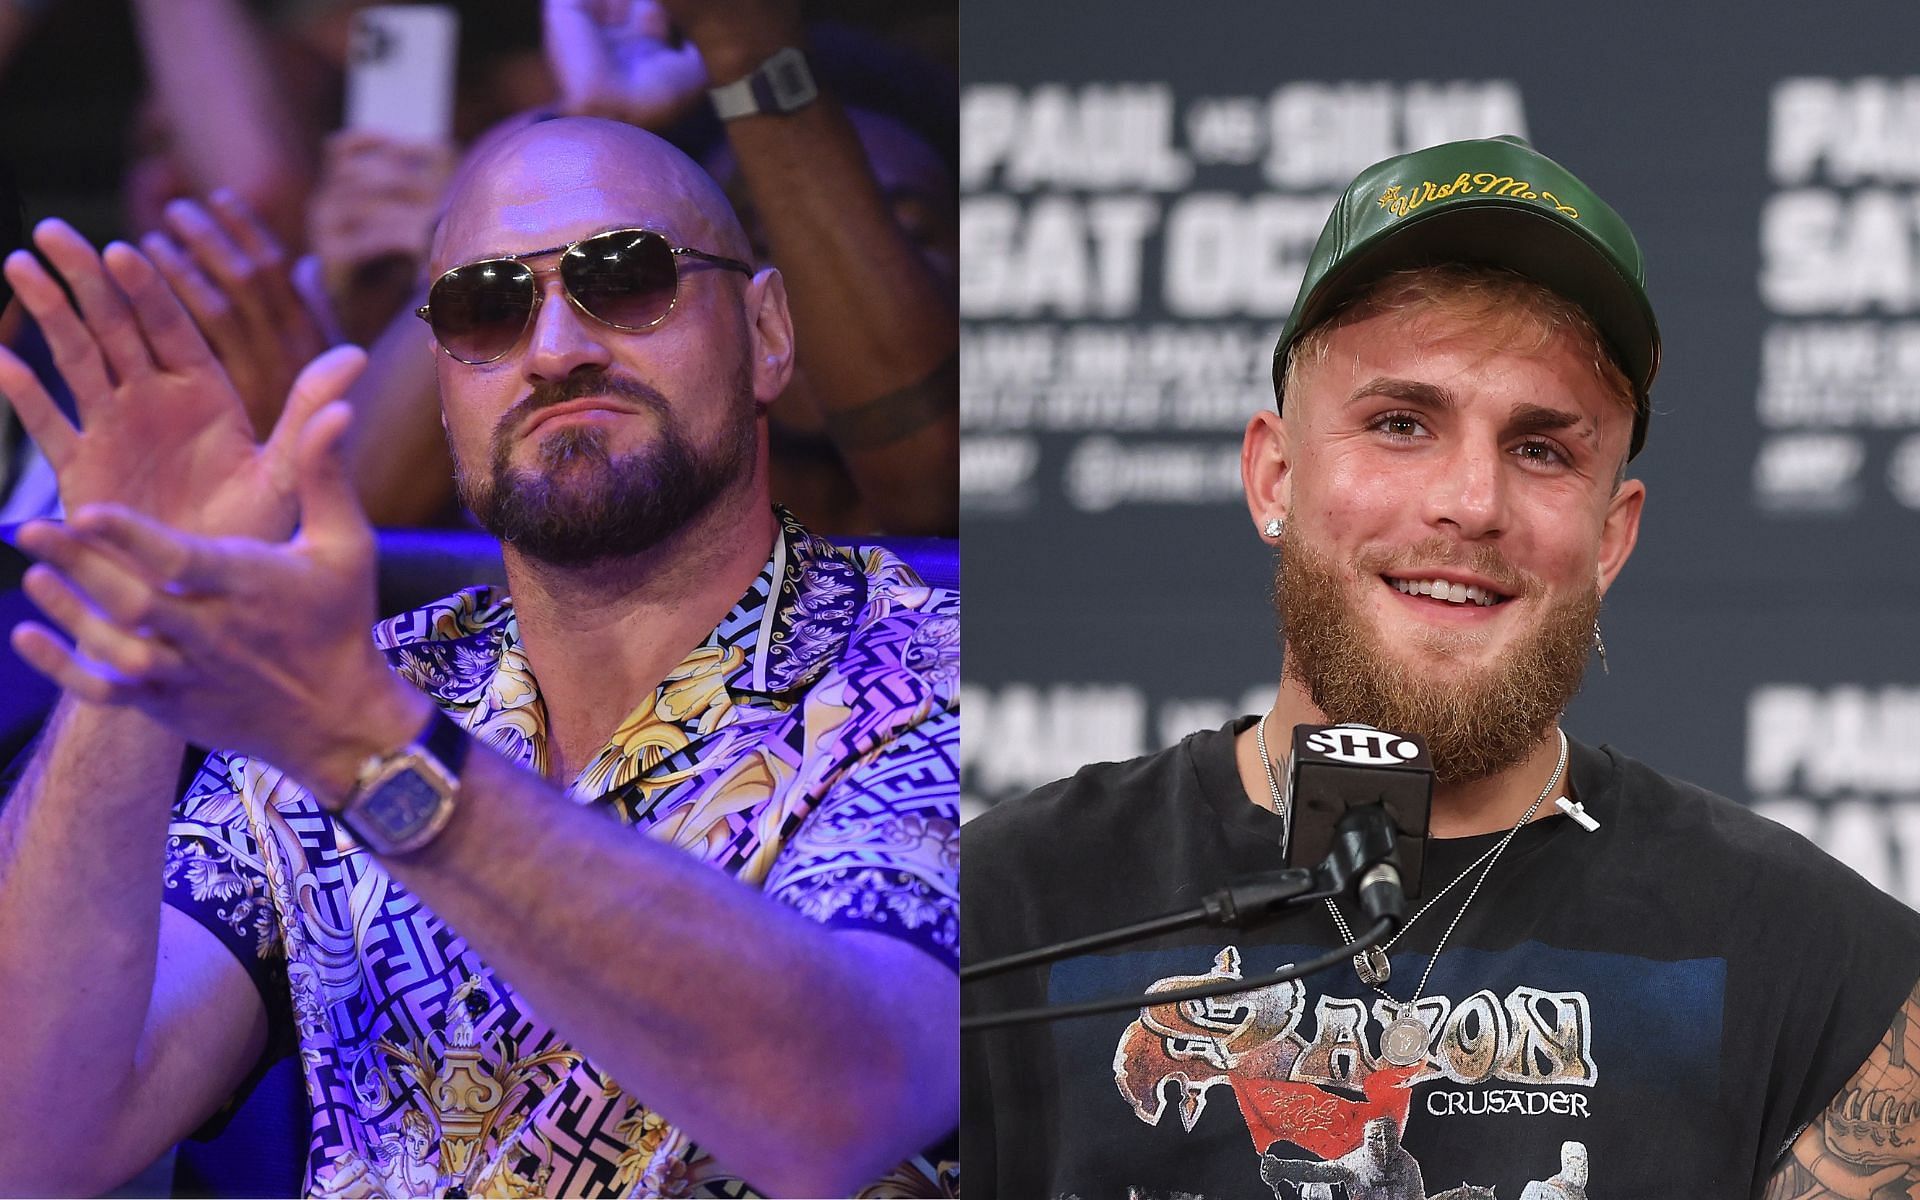 Tyson Fury (left) and Jake Paul (right) (Image credits Getty Images)